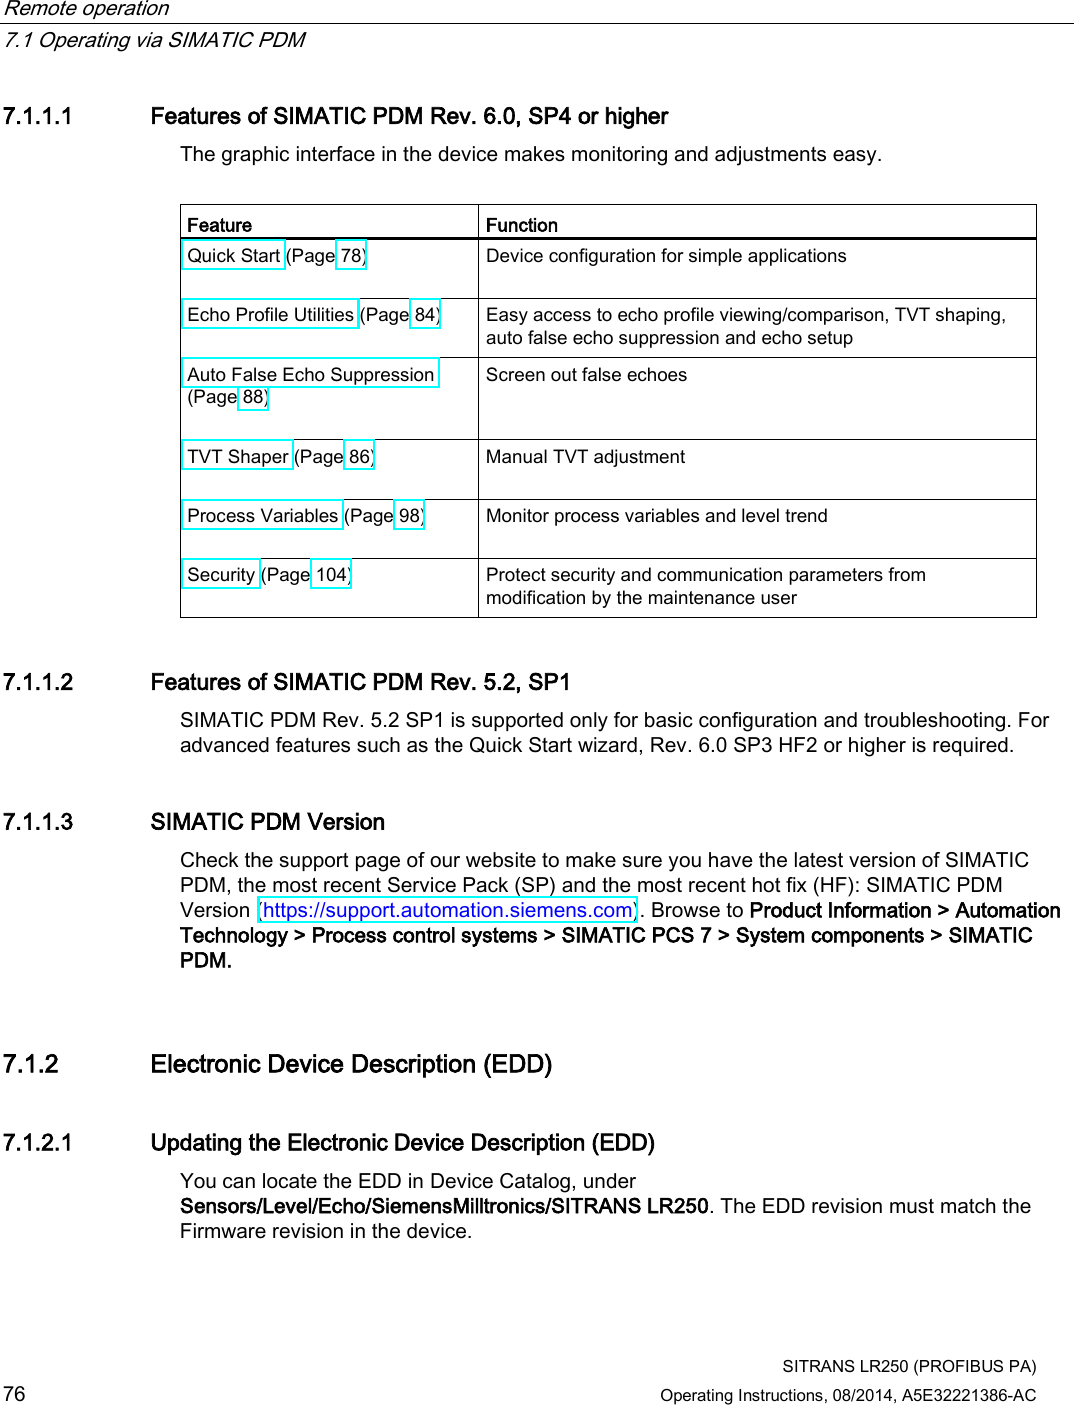 Remote operation   7.1 Operating via SIMATIC PDM  SITRANS LR250 (PROFIBUS PA) 76 Operating Instructions, 08/2014, A5E32221386-AC 7.1.1.1 Features of SIMATIC PDM Rev. 6.0, SP4 or higher The graphic interface in the device makes monitoring and adjustments easy.  Feature Function Quick Start (Page 78)  Device configuration for simple applications Echo Profile Utilities (Page 84)  Easy access to echo profile viewing/comparison, TVT shaping, auto false echo suppression and echo setup Auto False Echo Suppression (Page 88)  Screen out false echoes TVT Shaper (Page 86)  Manual TVT adjustment Process Variables (Page 98)  Monitor process variables and level trend Security (Page 104)  Protect security and communication parameters from modification by the maintenance user 7.1.1.2 Features of SIMATIC PDM Rev. 5.2, SP1 SIMATIC PDM Rev. 5.2 SP1 is supported only for basic configuration and troubleshooting. For advanced features such as the Quick Start wizard, Rev. 6.0 SP3 HF2 or higher is required. 7.1.1.3 SIMATIC PDM Version Check the support page of our website to make sure you have the latest version of SIMATIC PDM, the most recent Service Pack (SP) and the most recent hot fix (HF): SIMATIC PDM Version (https://support.automation.siemens.com). Browse to Product Information &gt; Automation Technology &gt; Process control systems &gt; SIMATIC PCS 7 &gt; System components &gt; SIMATIC PDM. 7.1.2 Electronic Device Description (EDD) 7.1.2.1 Updating the Electronic Device Description (EDD) You can locate the EDD in Device Catalog, under Sensors/Level/Echo/SiemensMilltronics/SITRANS LR250. The EDD revision must match the Firmware revision in the device. 